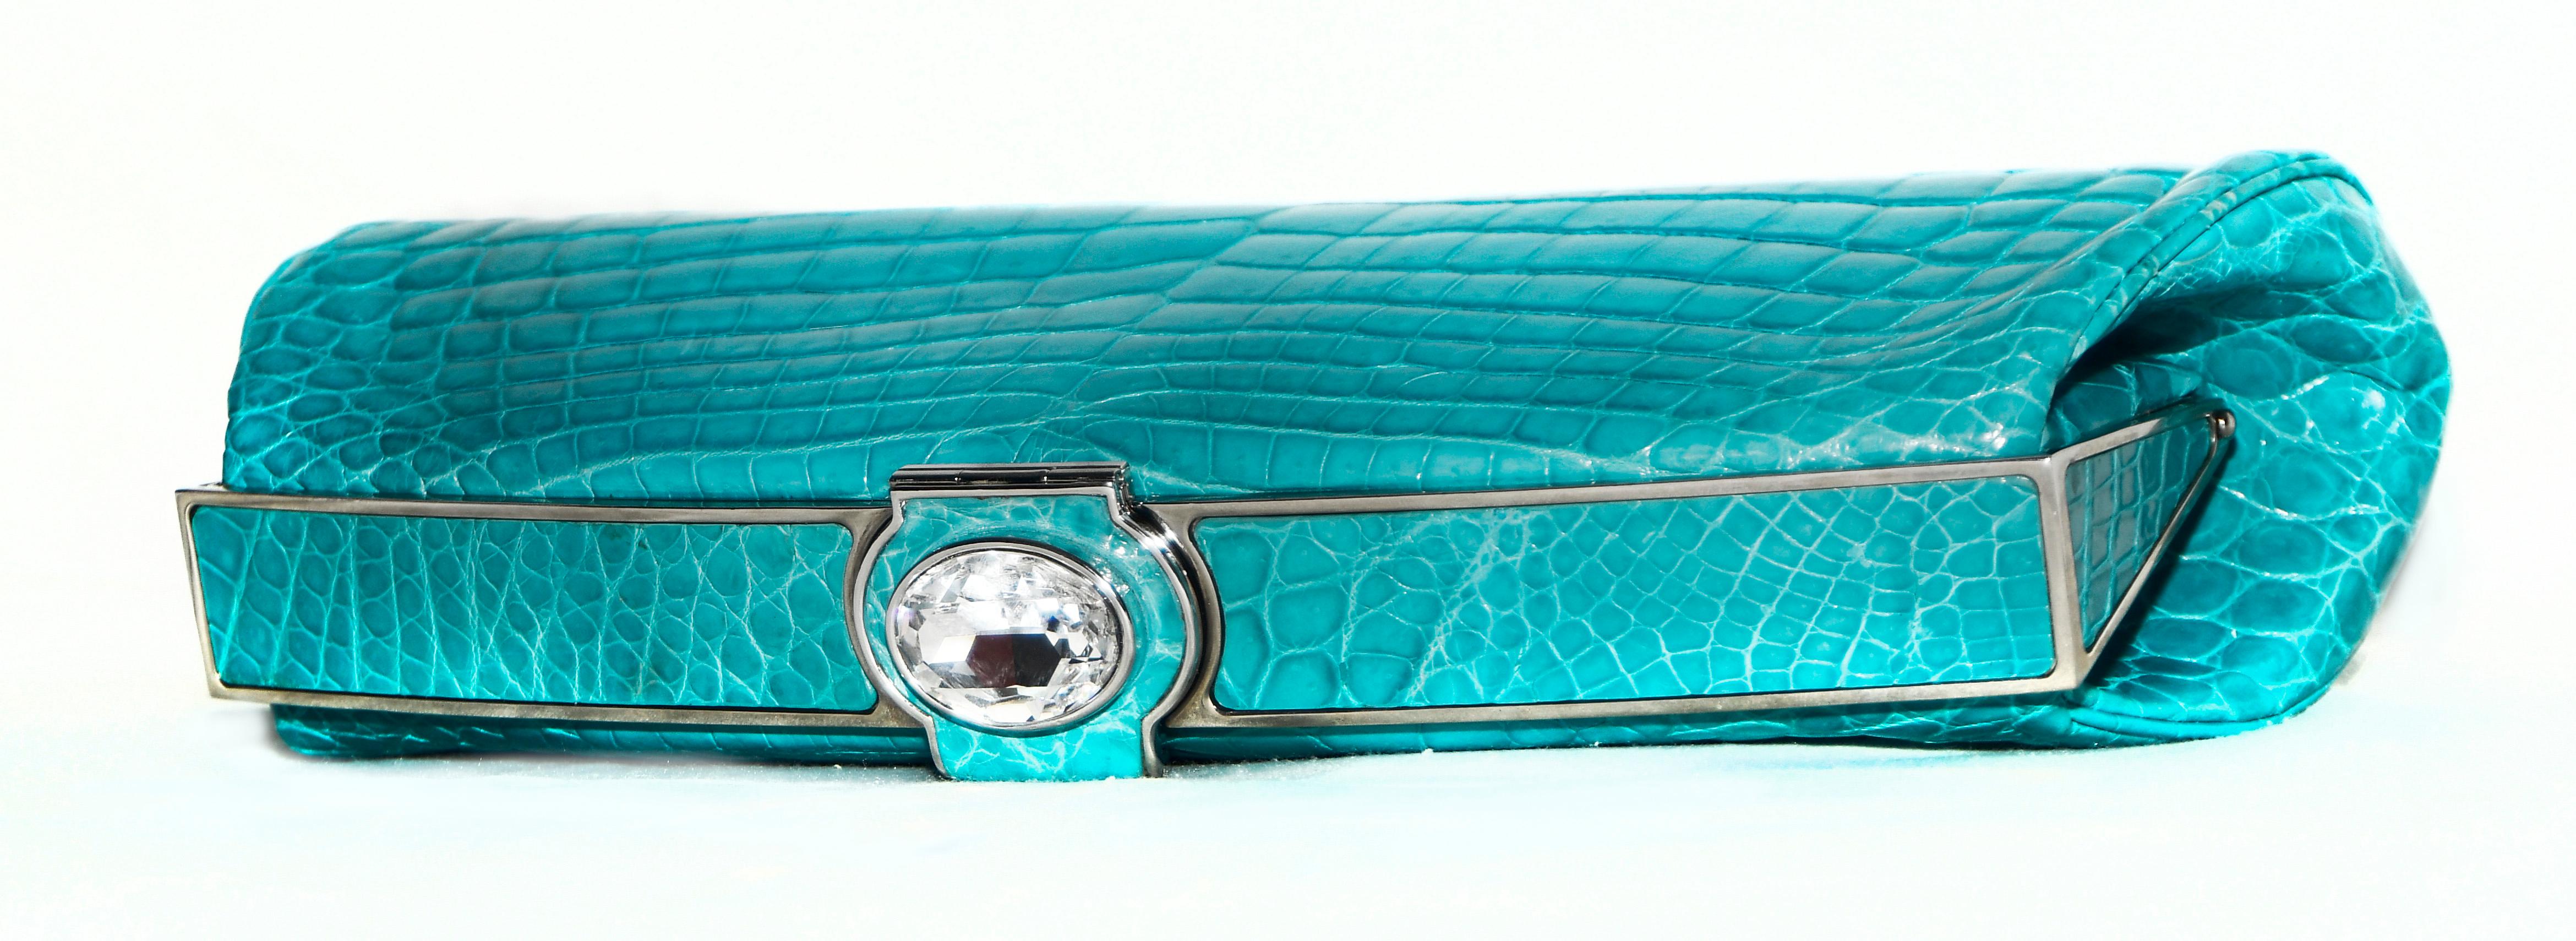 Judith Leiber Turquoise Croc Clutch With Crystal Top Closure In Excellent Condition For Sale In Palm Beach, FL